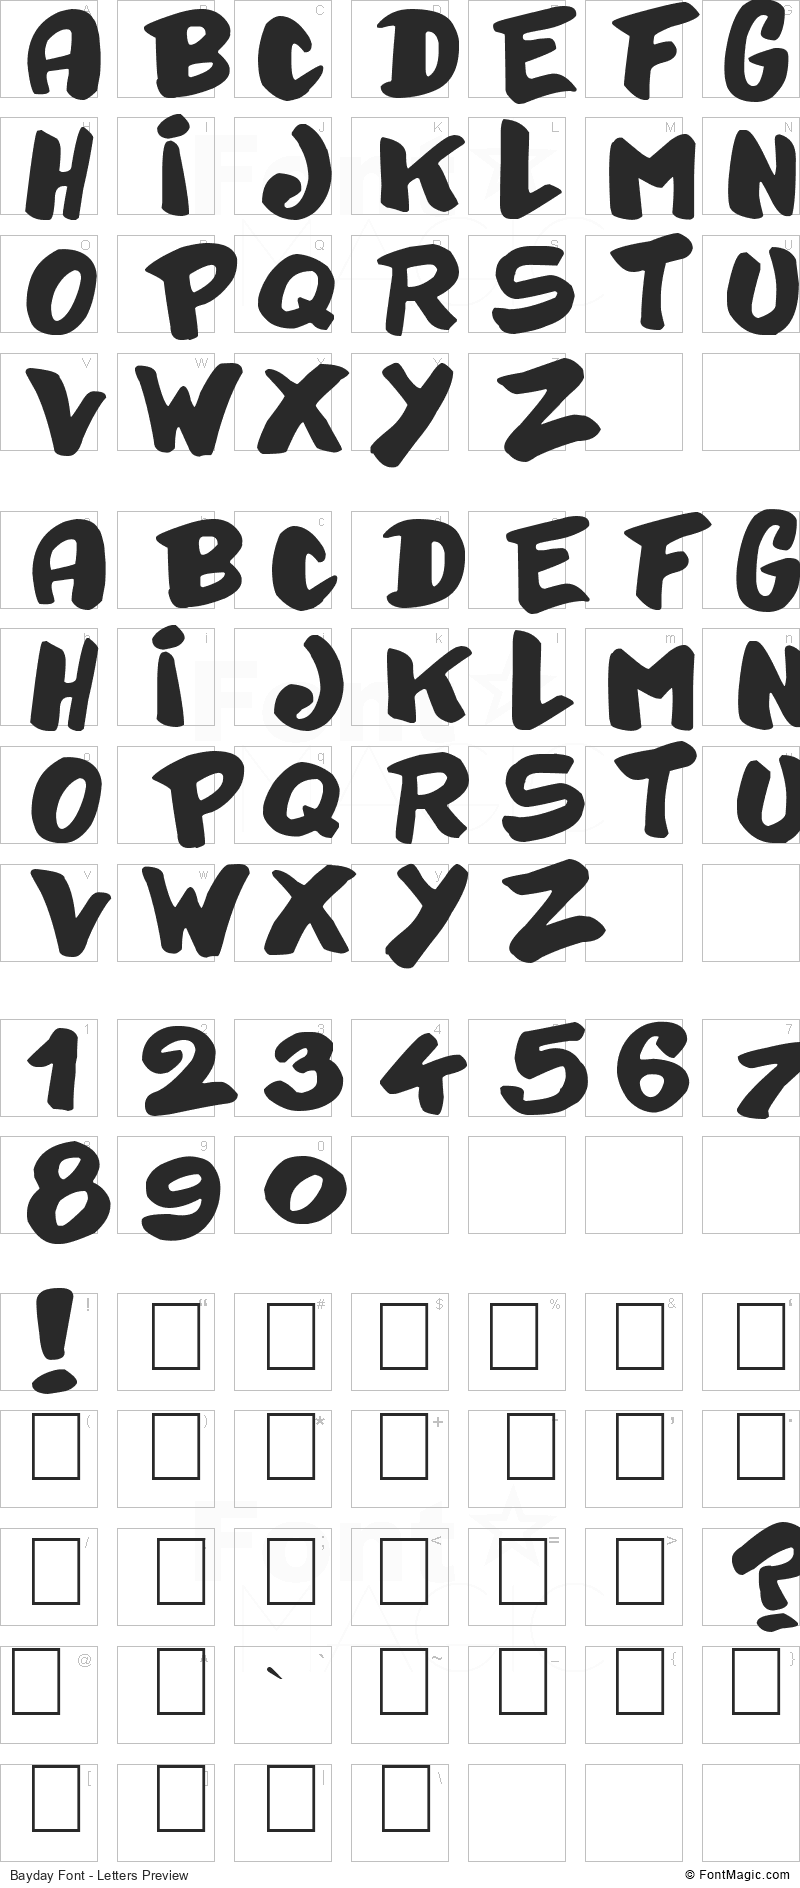 Bayday Font - All Latters Preview Chart